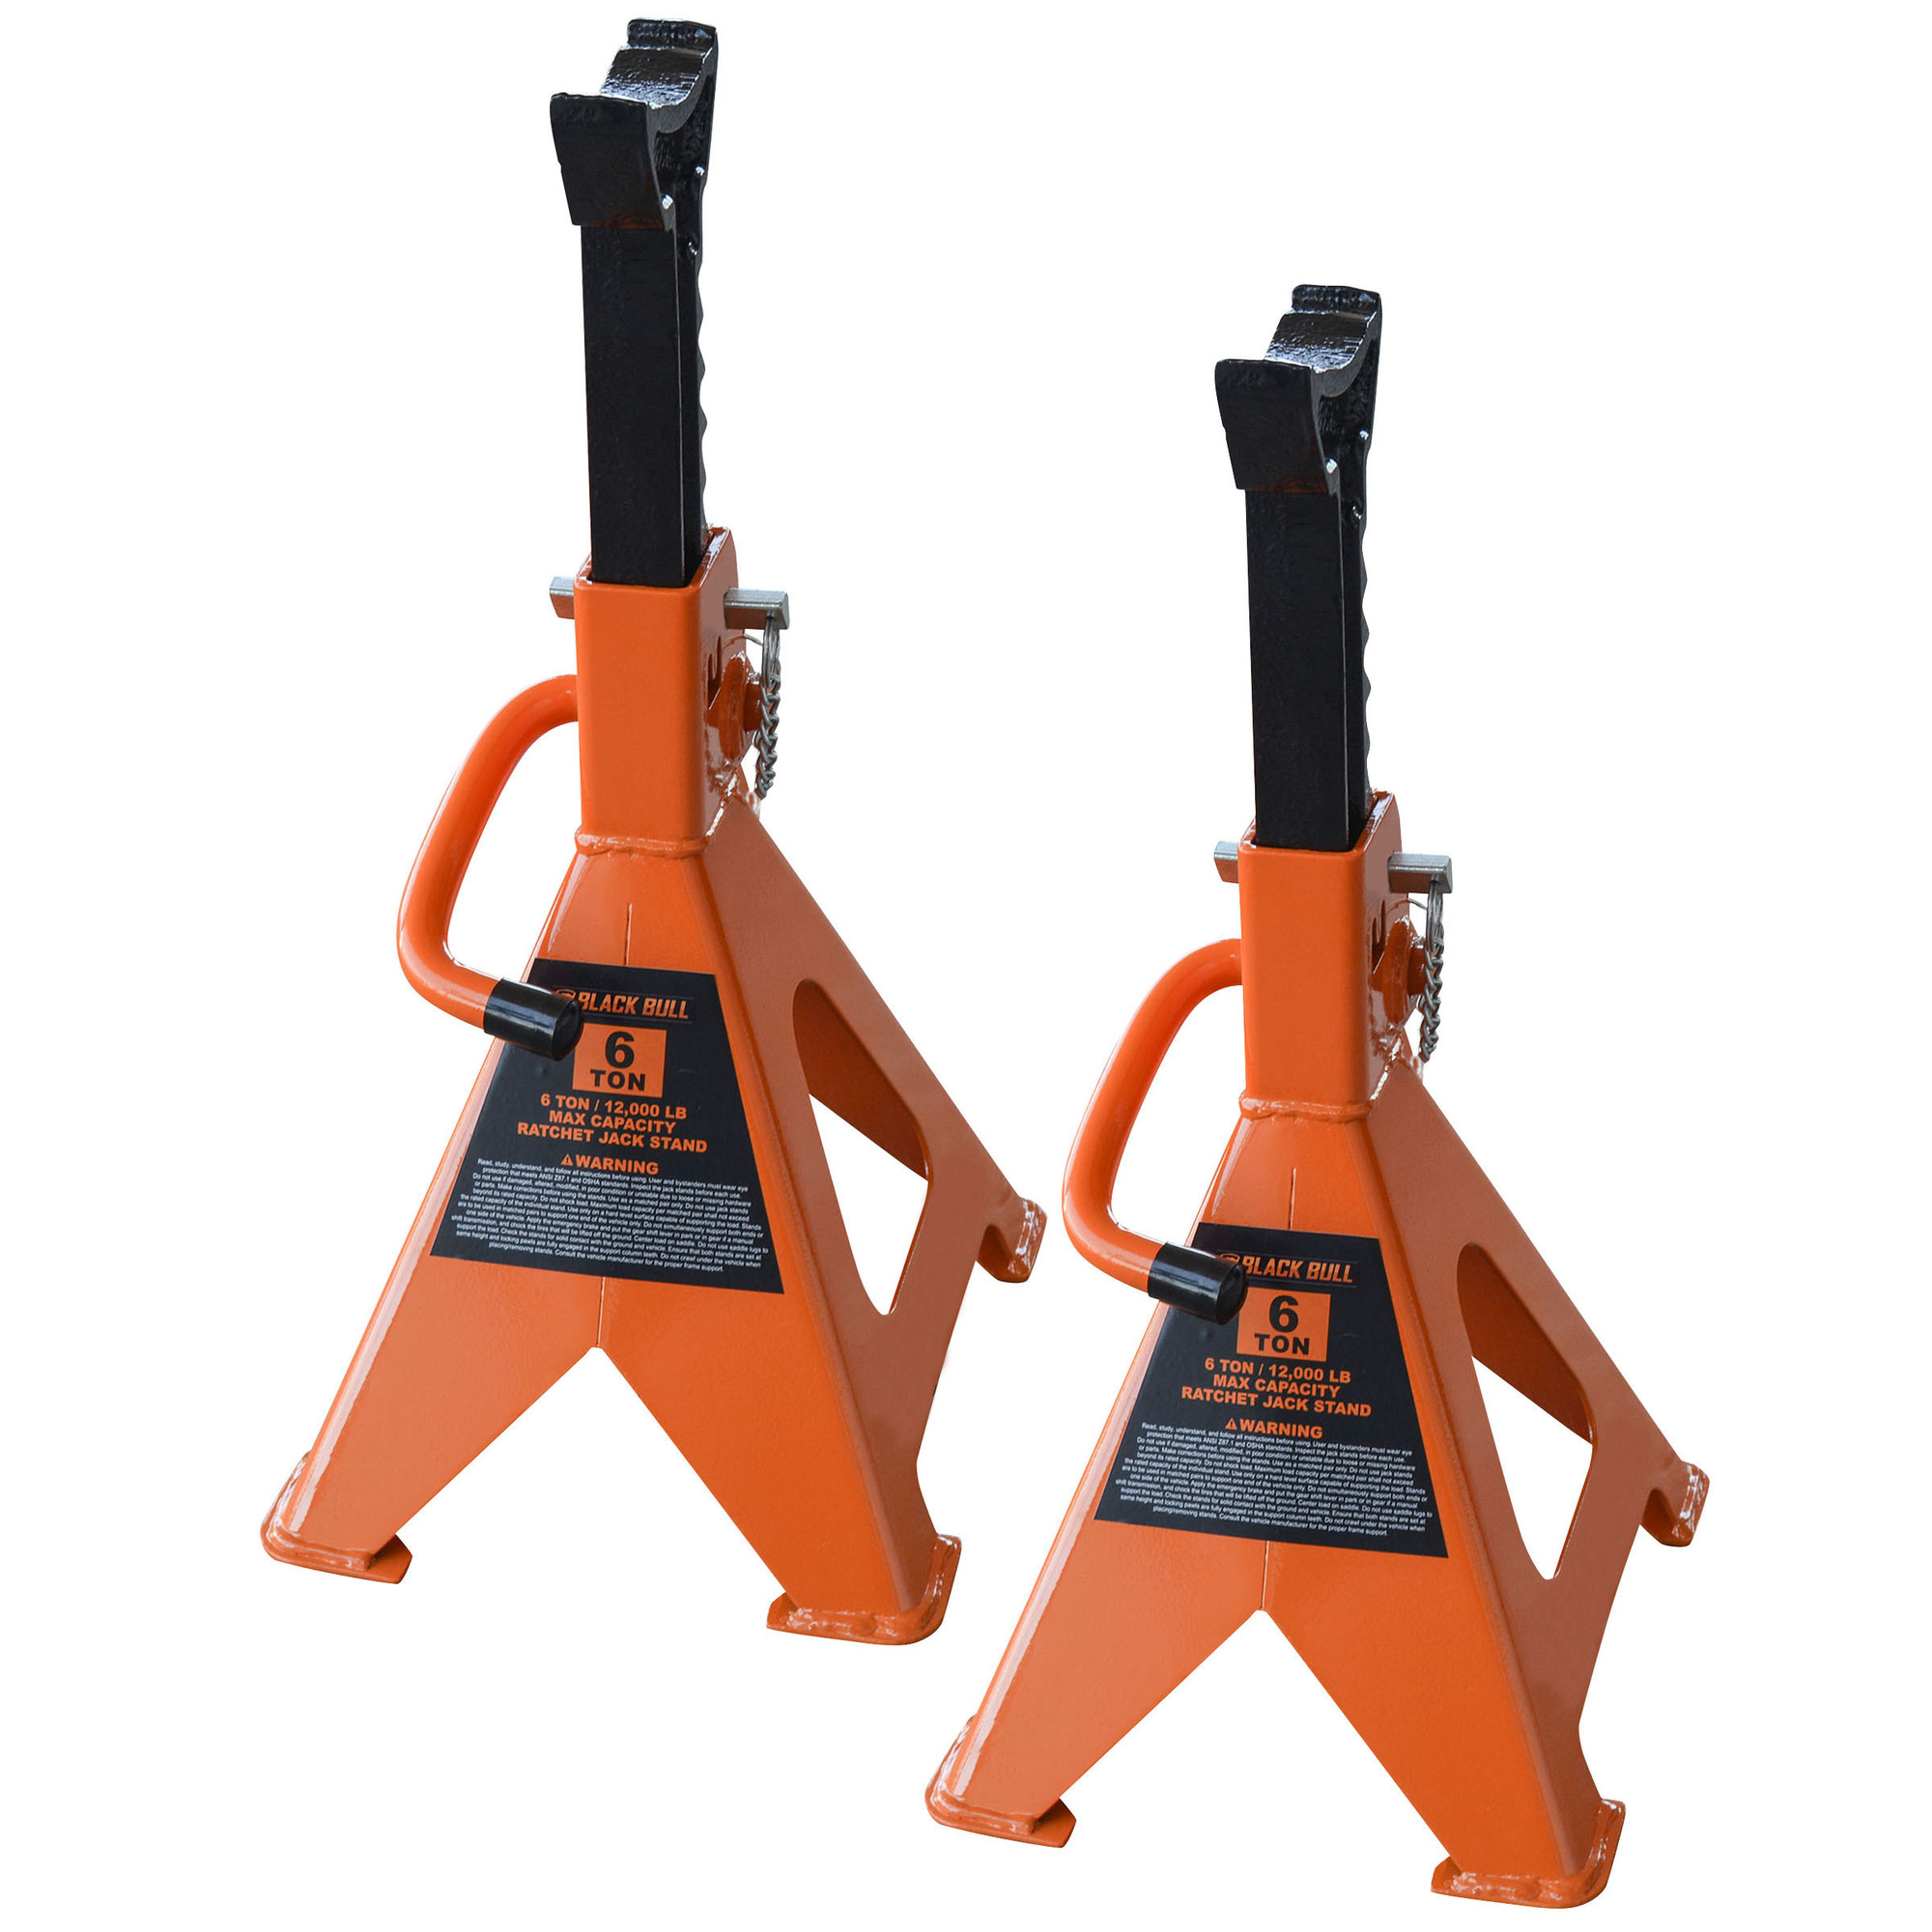 Buffalo Tools, 6 Ton Jack Stand Set (2pk), Lift Capacity 6 Tons, Max. Lift Height 23.5 in, MInch Lift Height 15 in, Model JS6SET